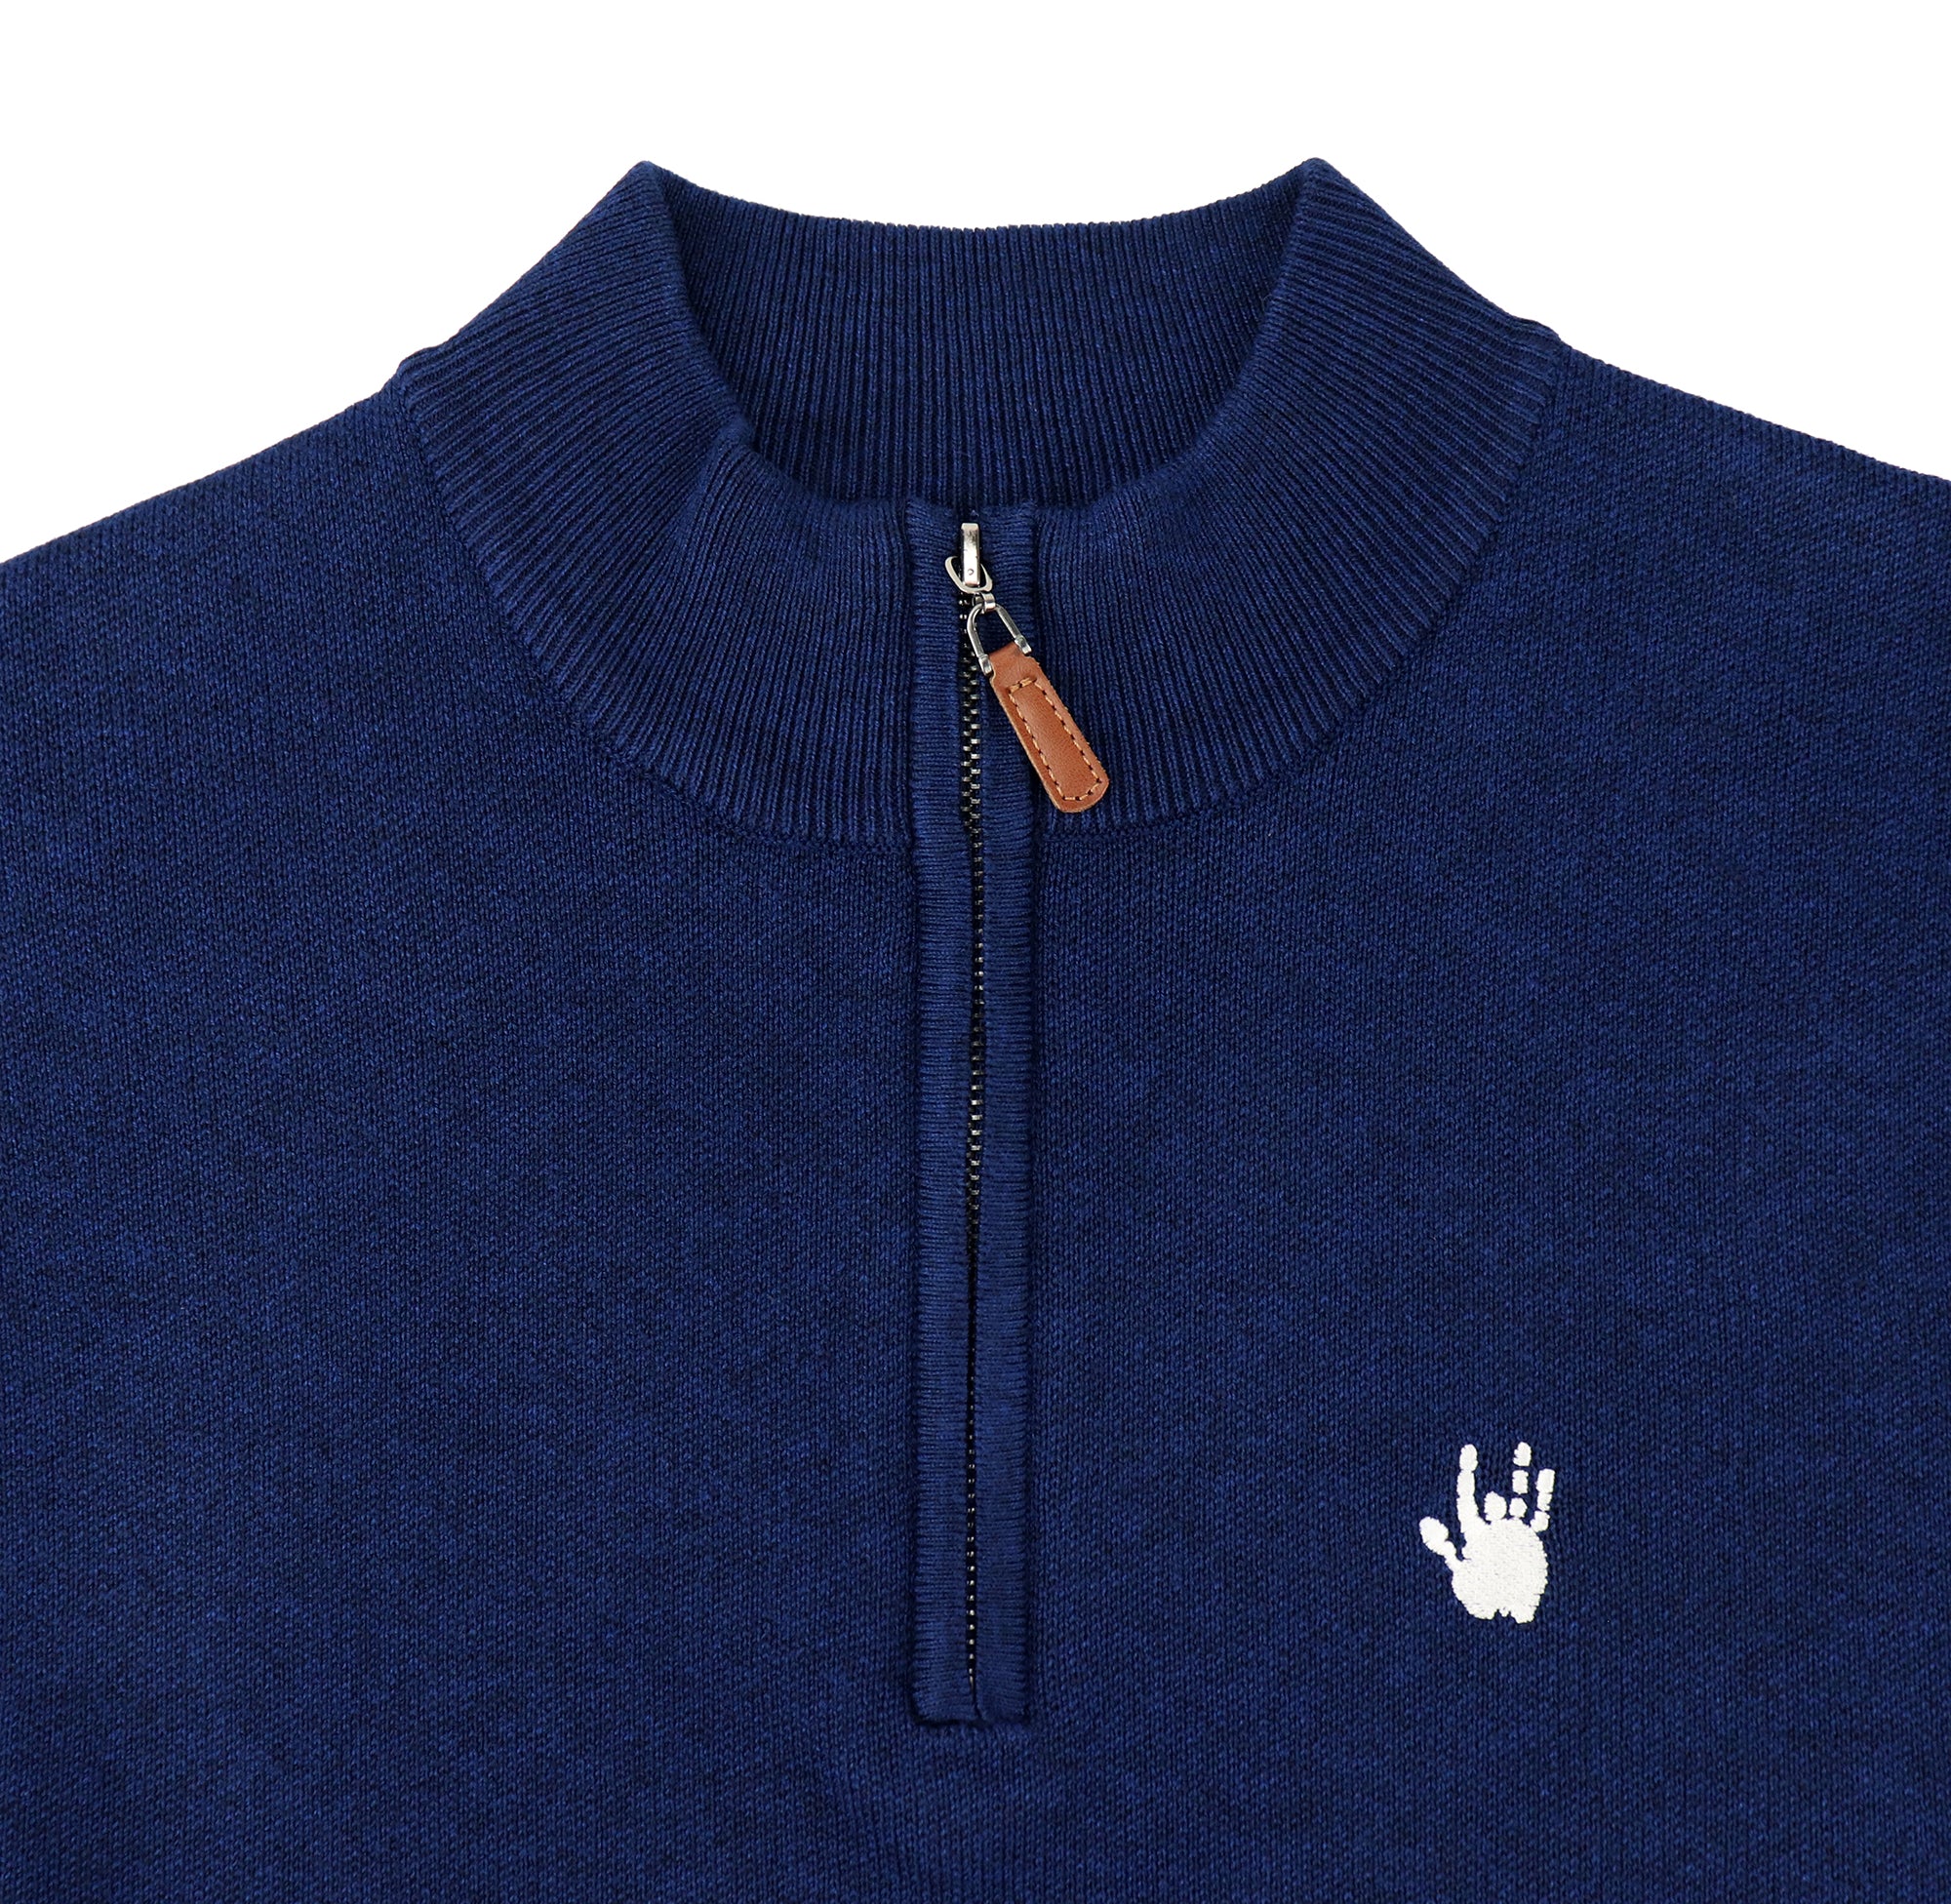 Jerry Garcia Quarter Zip Navy with Hand - Section 119